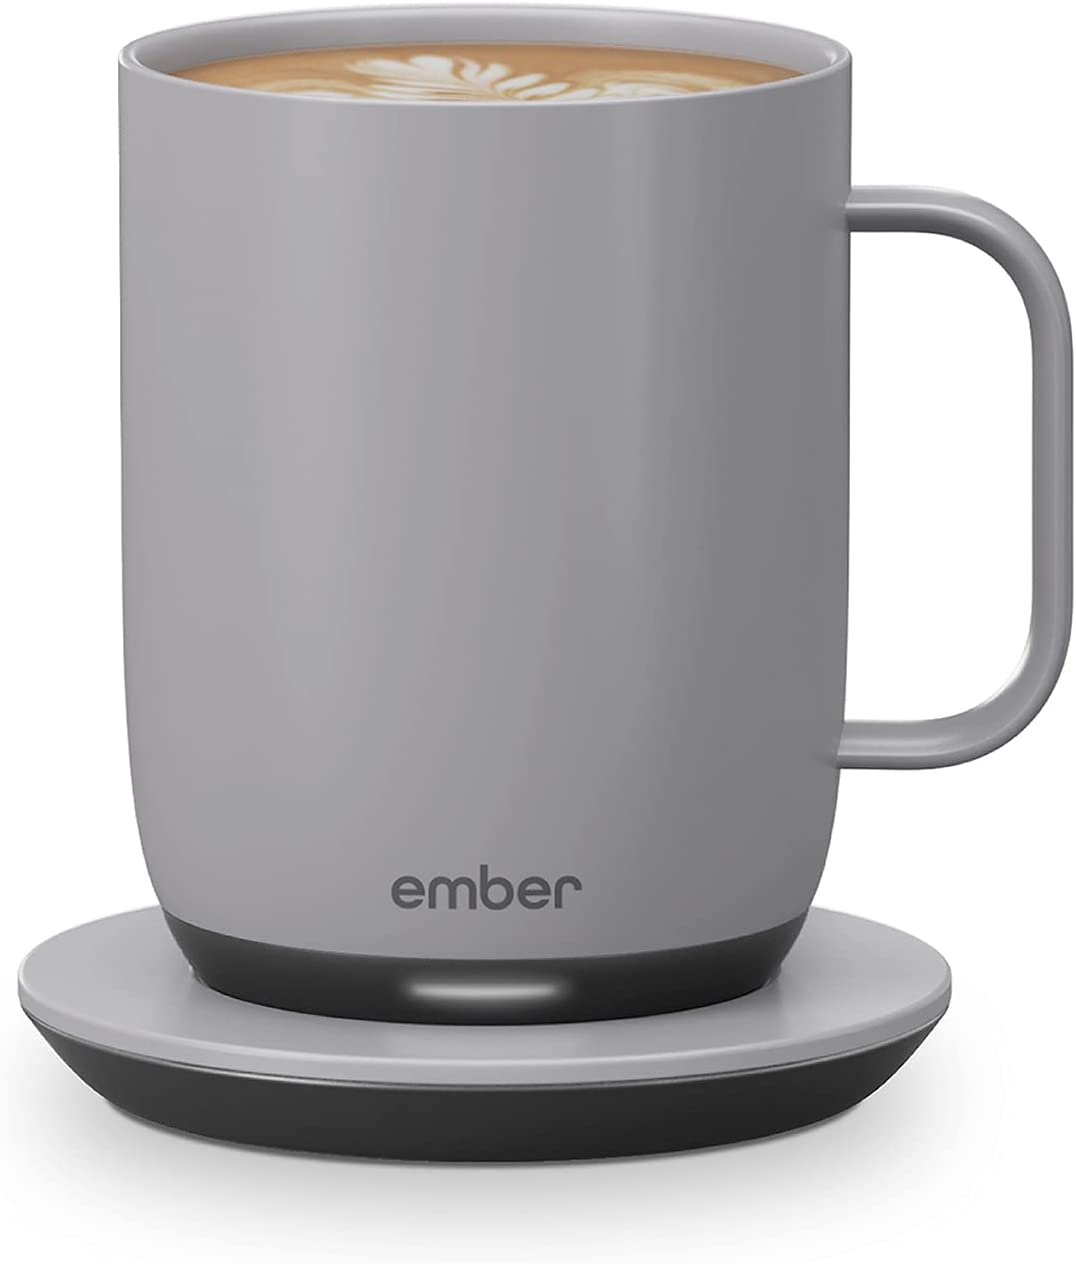 Ember's temperature control smart mug and charging coaster now $120 for  today only